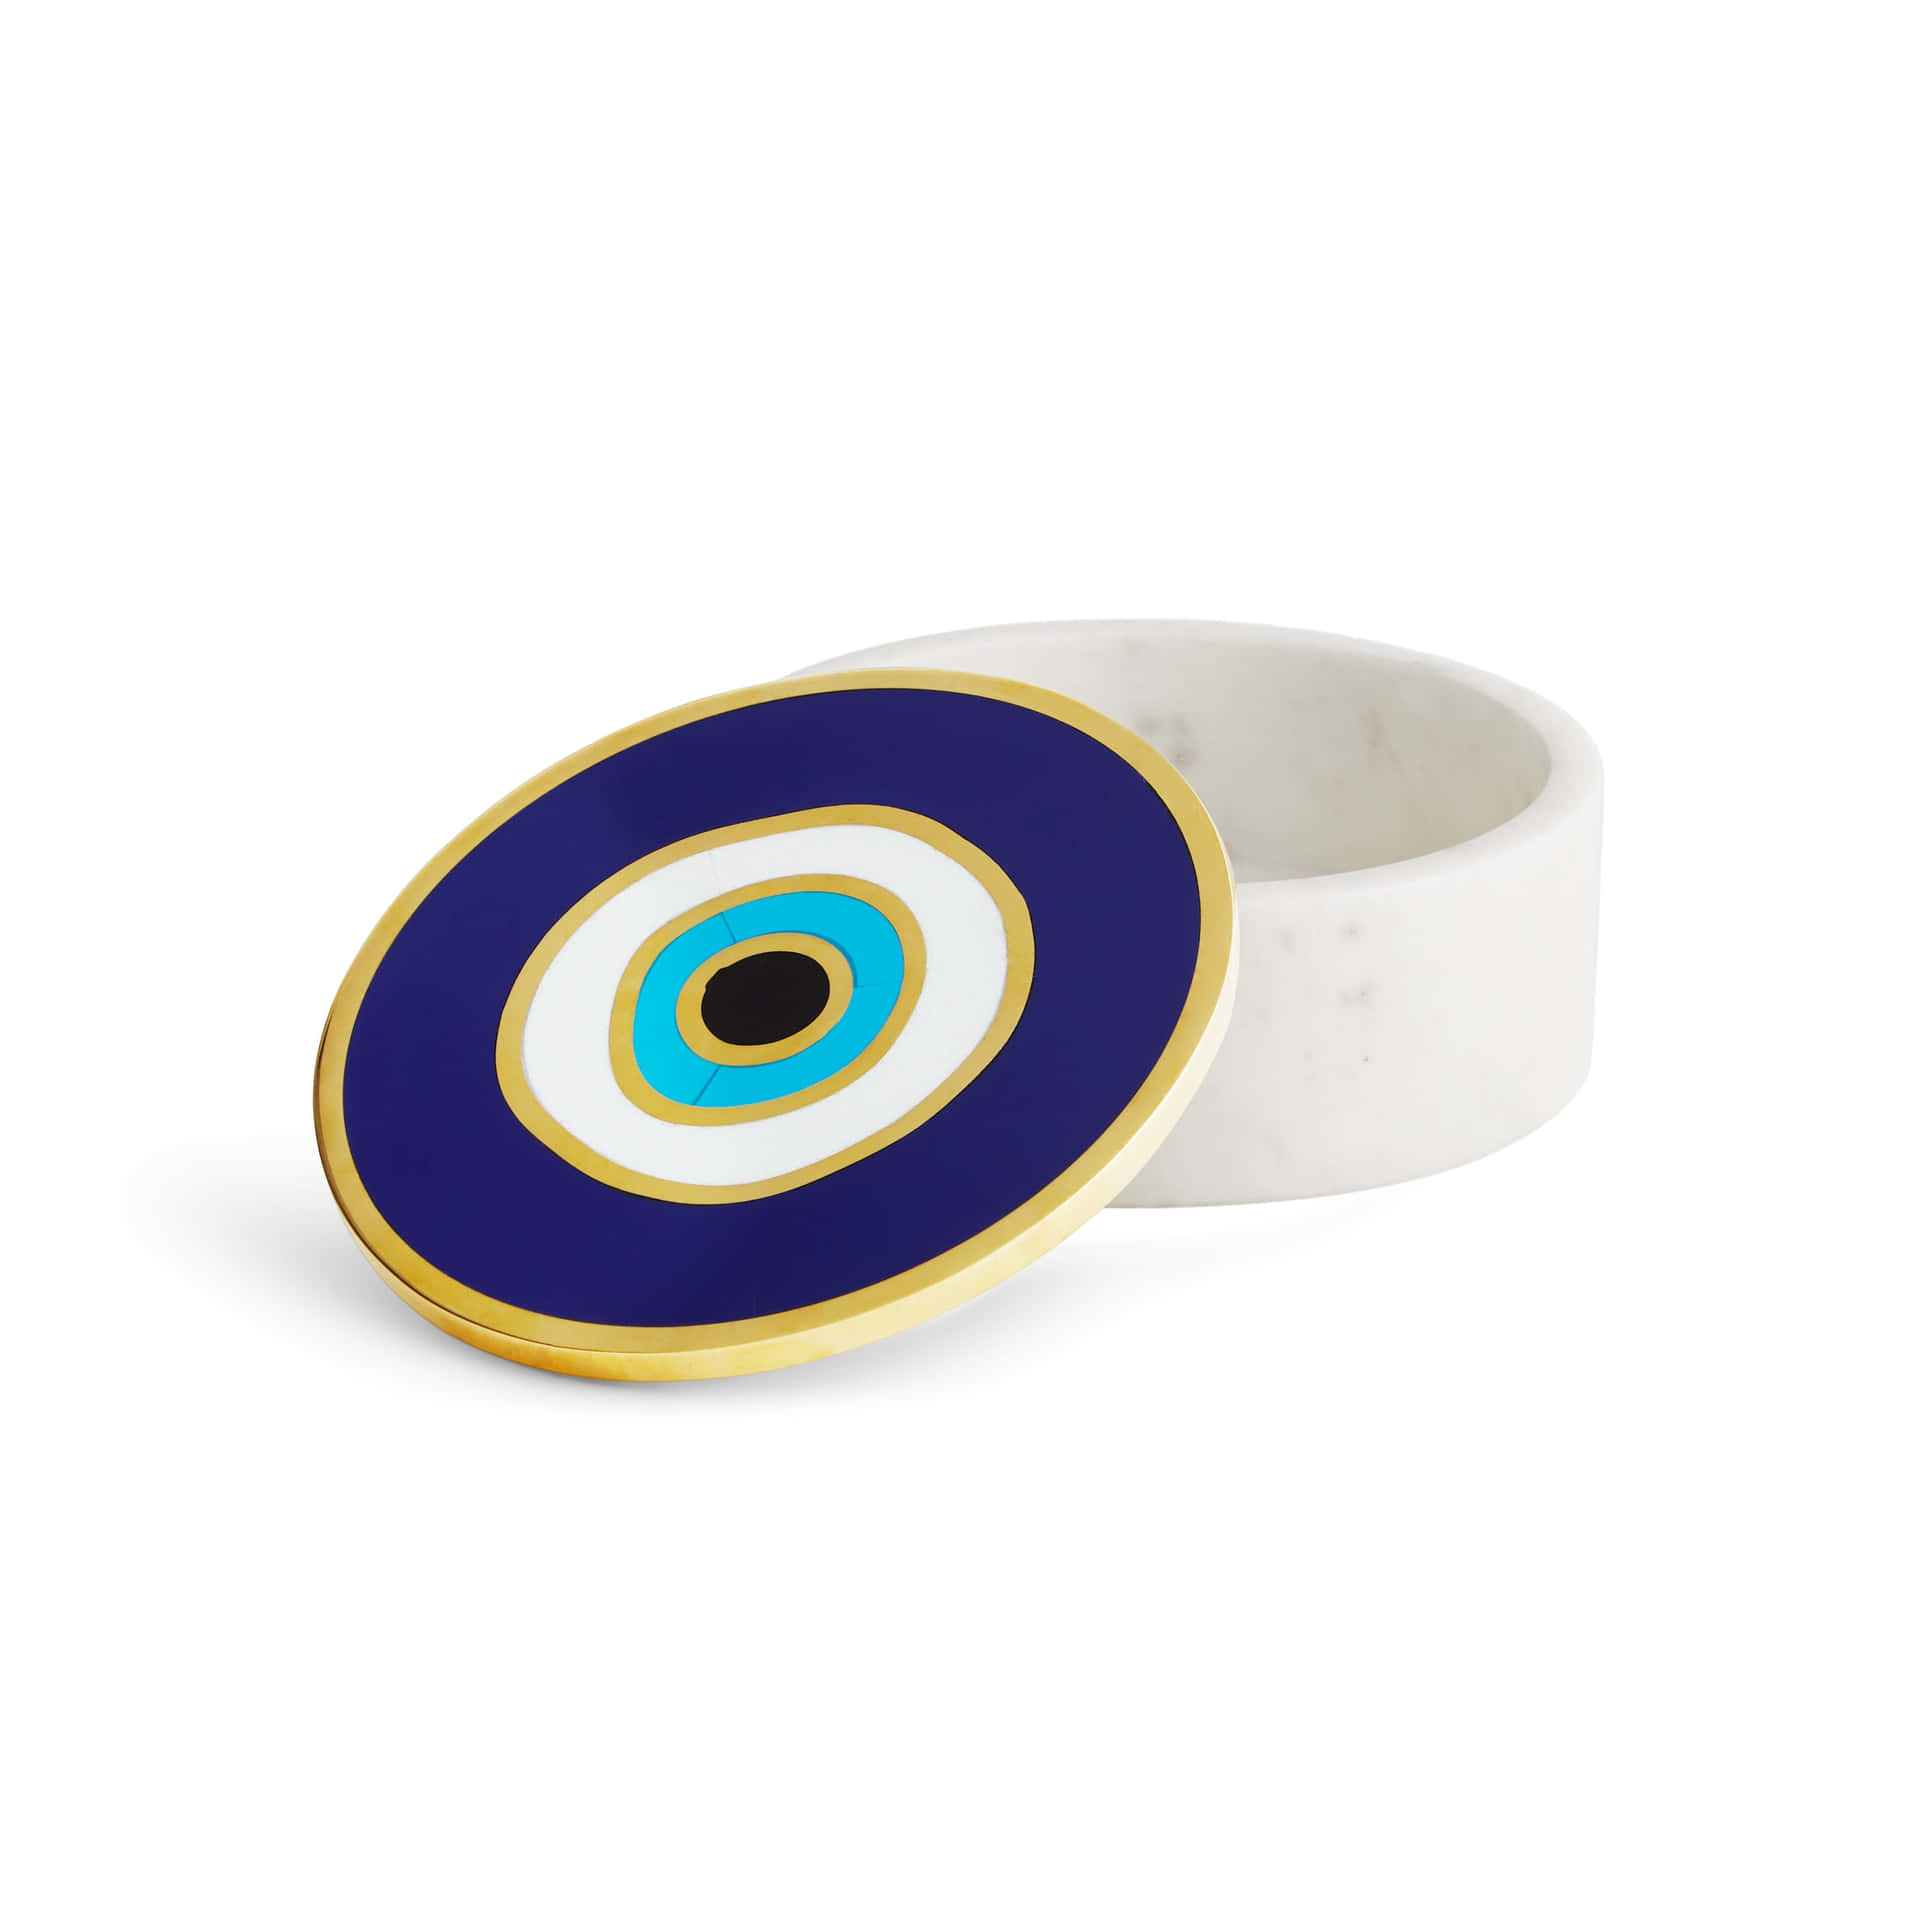 Protect yourself from bad energy with the Evil Eye